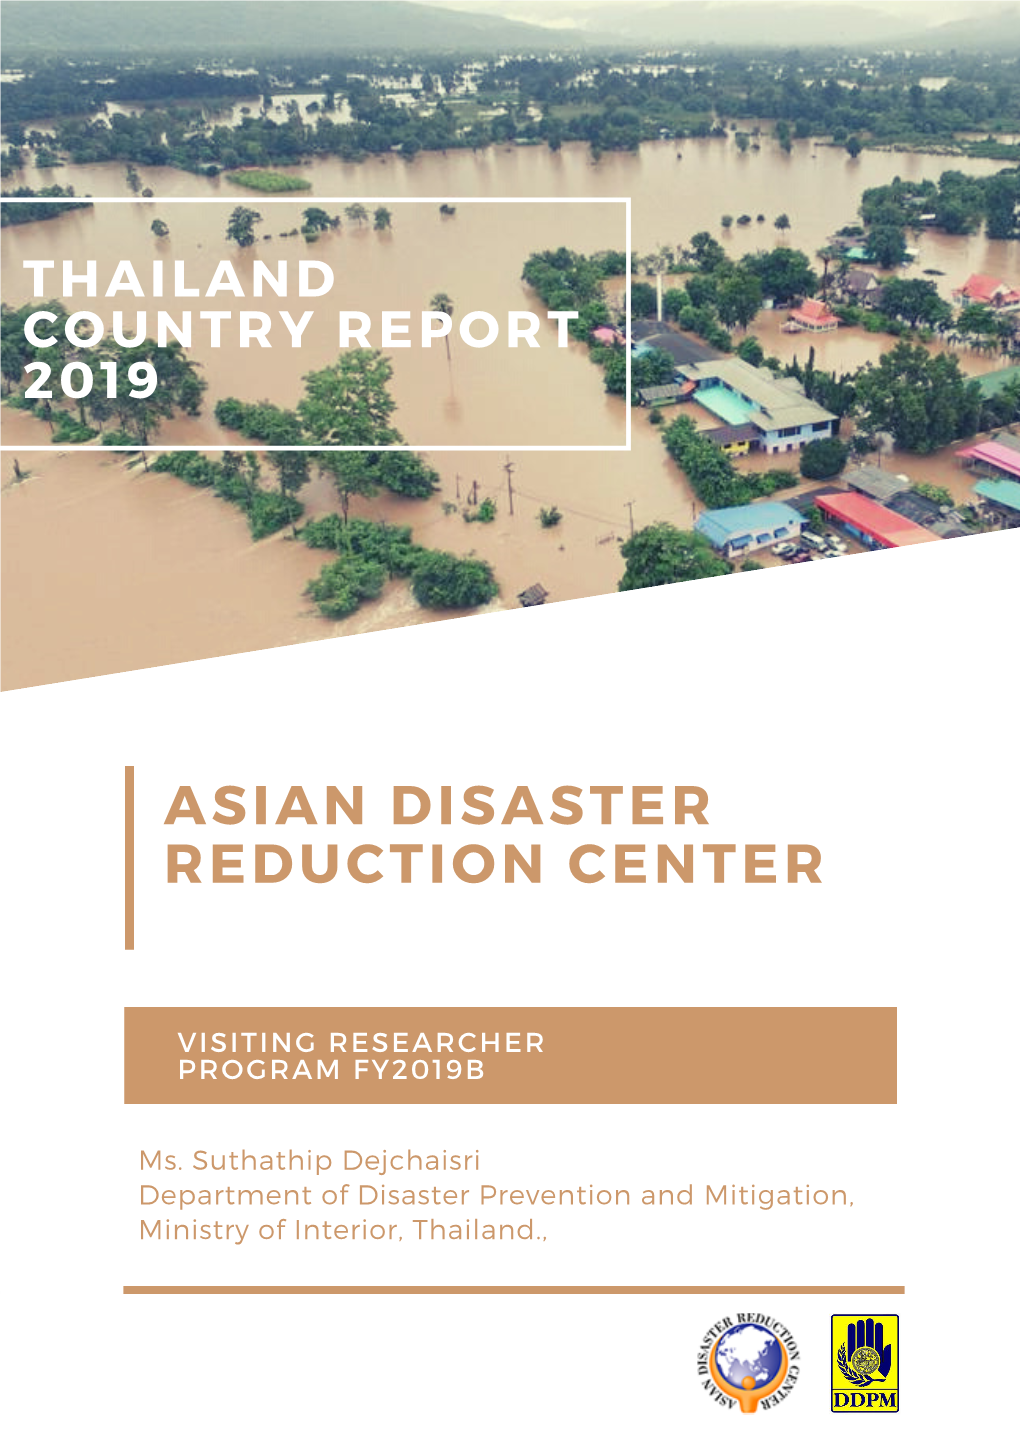 Thailand Country Report 2019